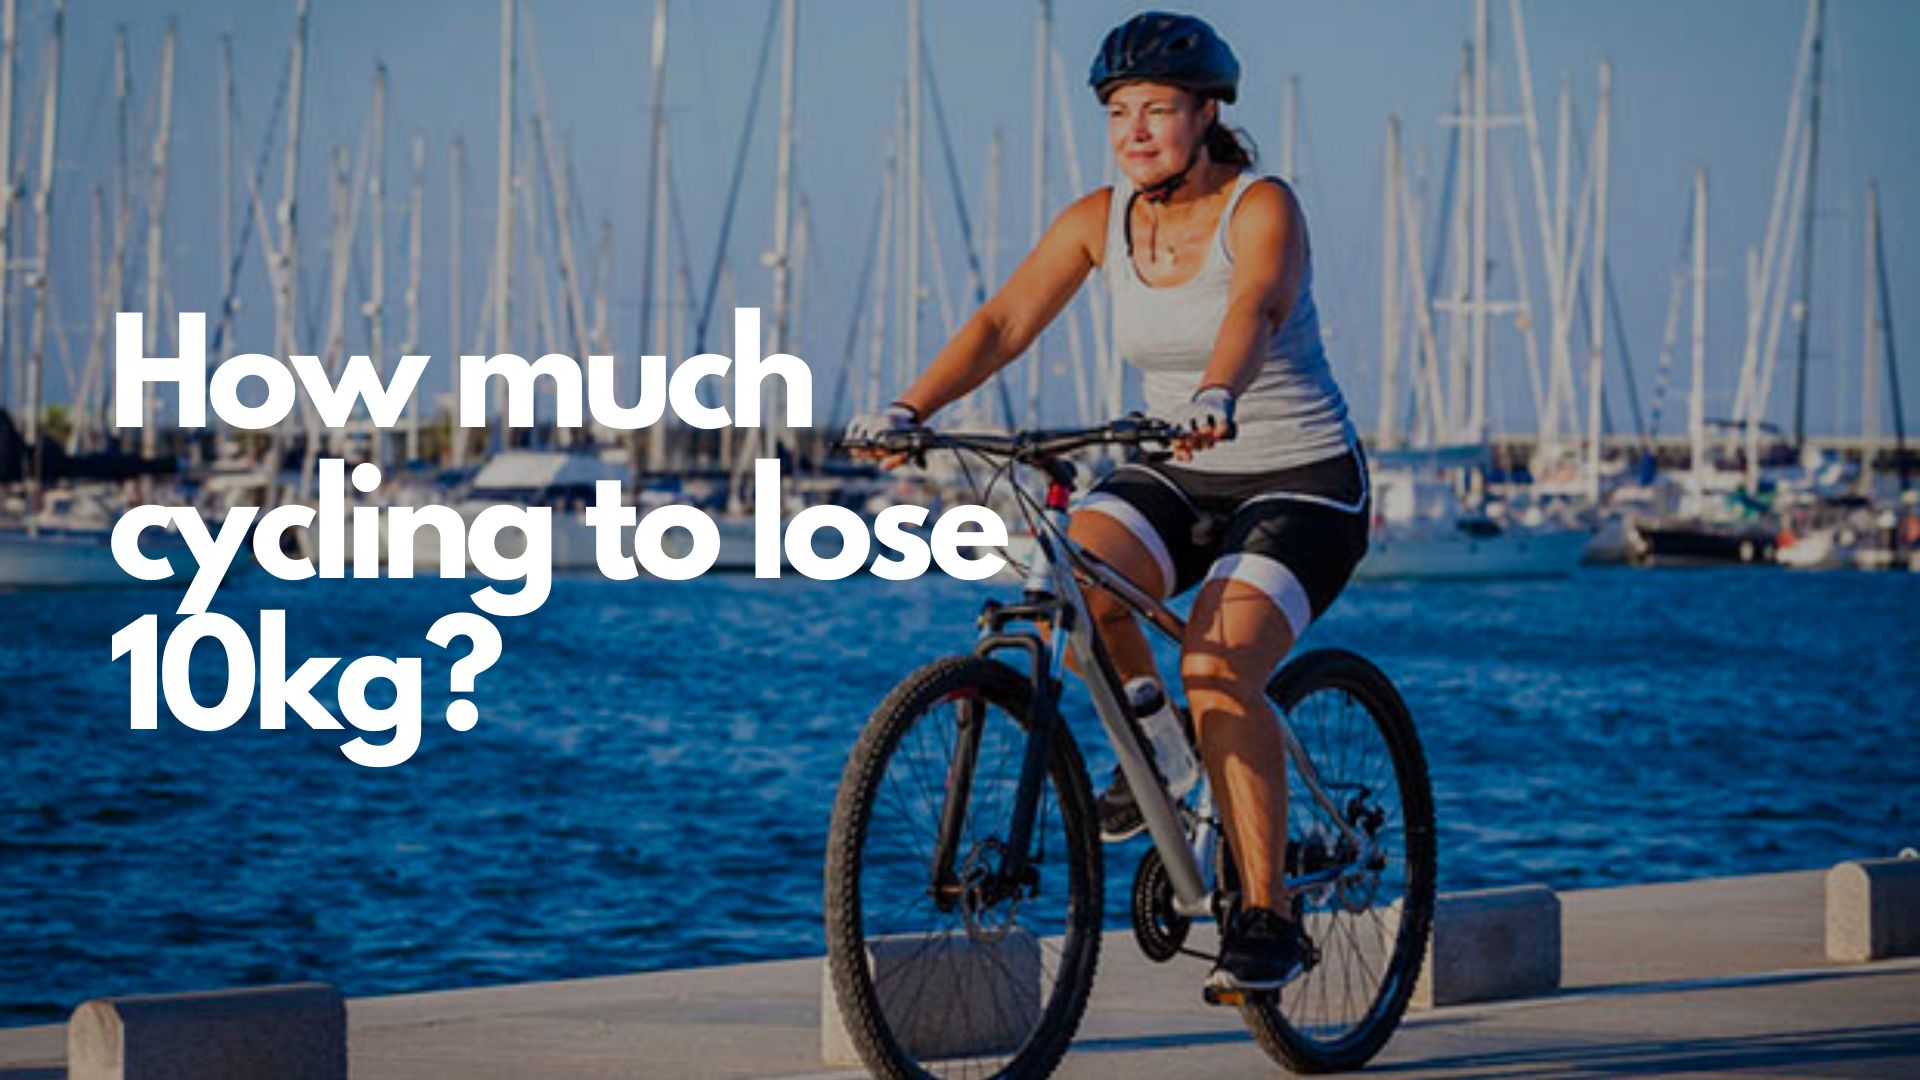 How much cycling to lose 10kg